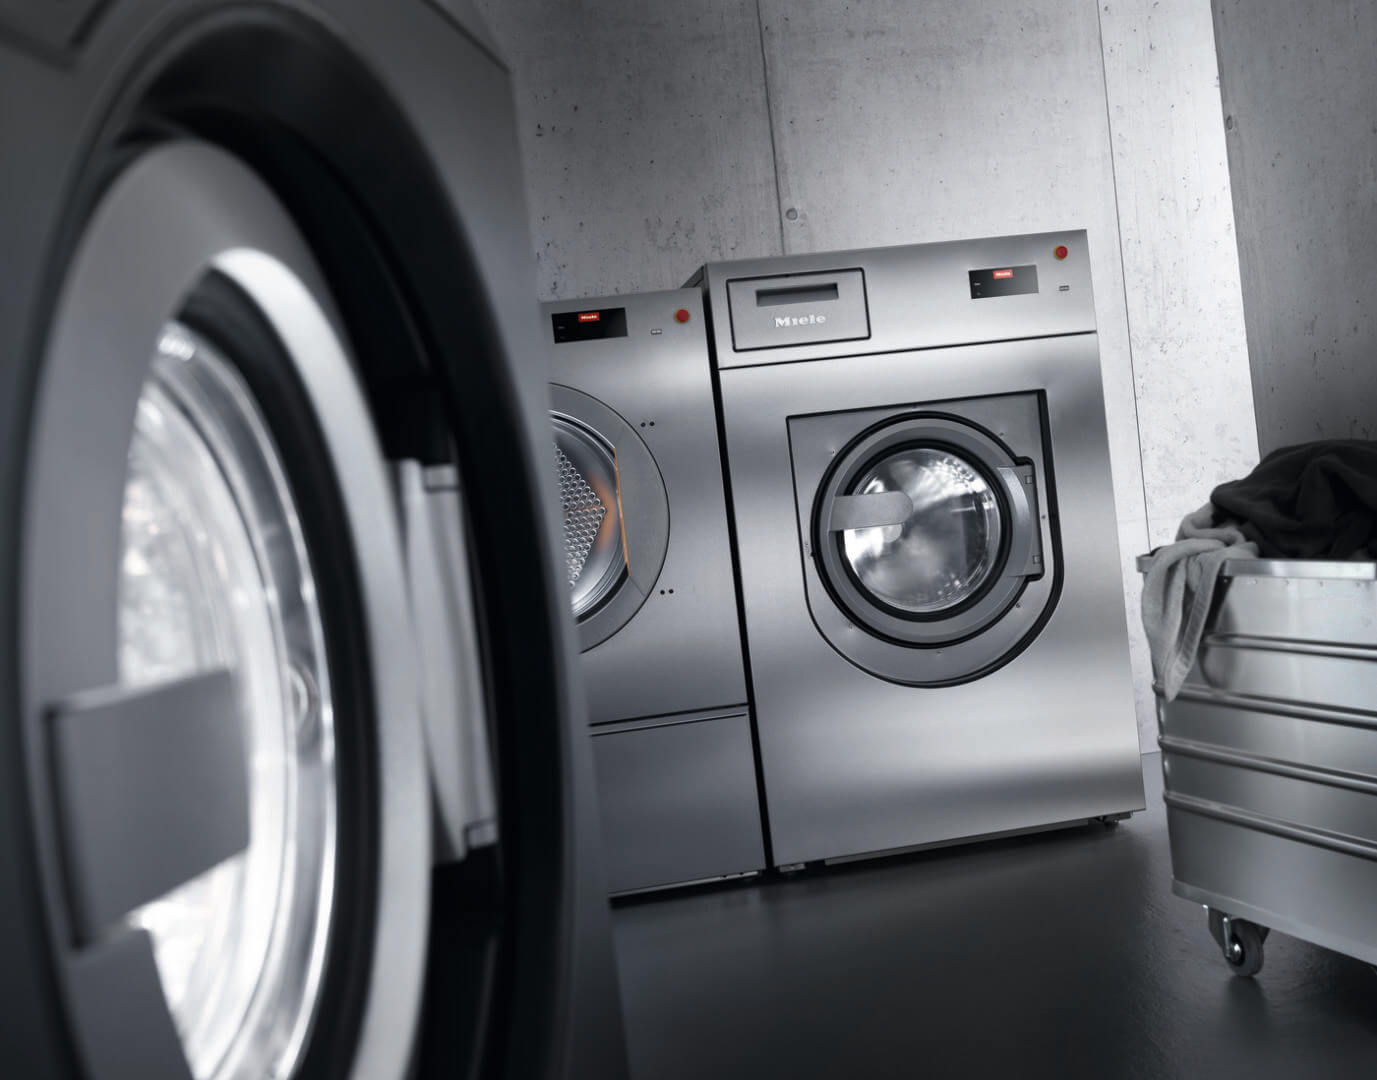 Miele sets a new standard in laundry care with its new Benchmark series